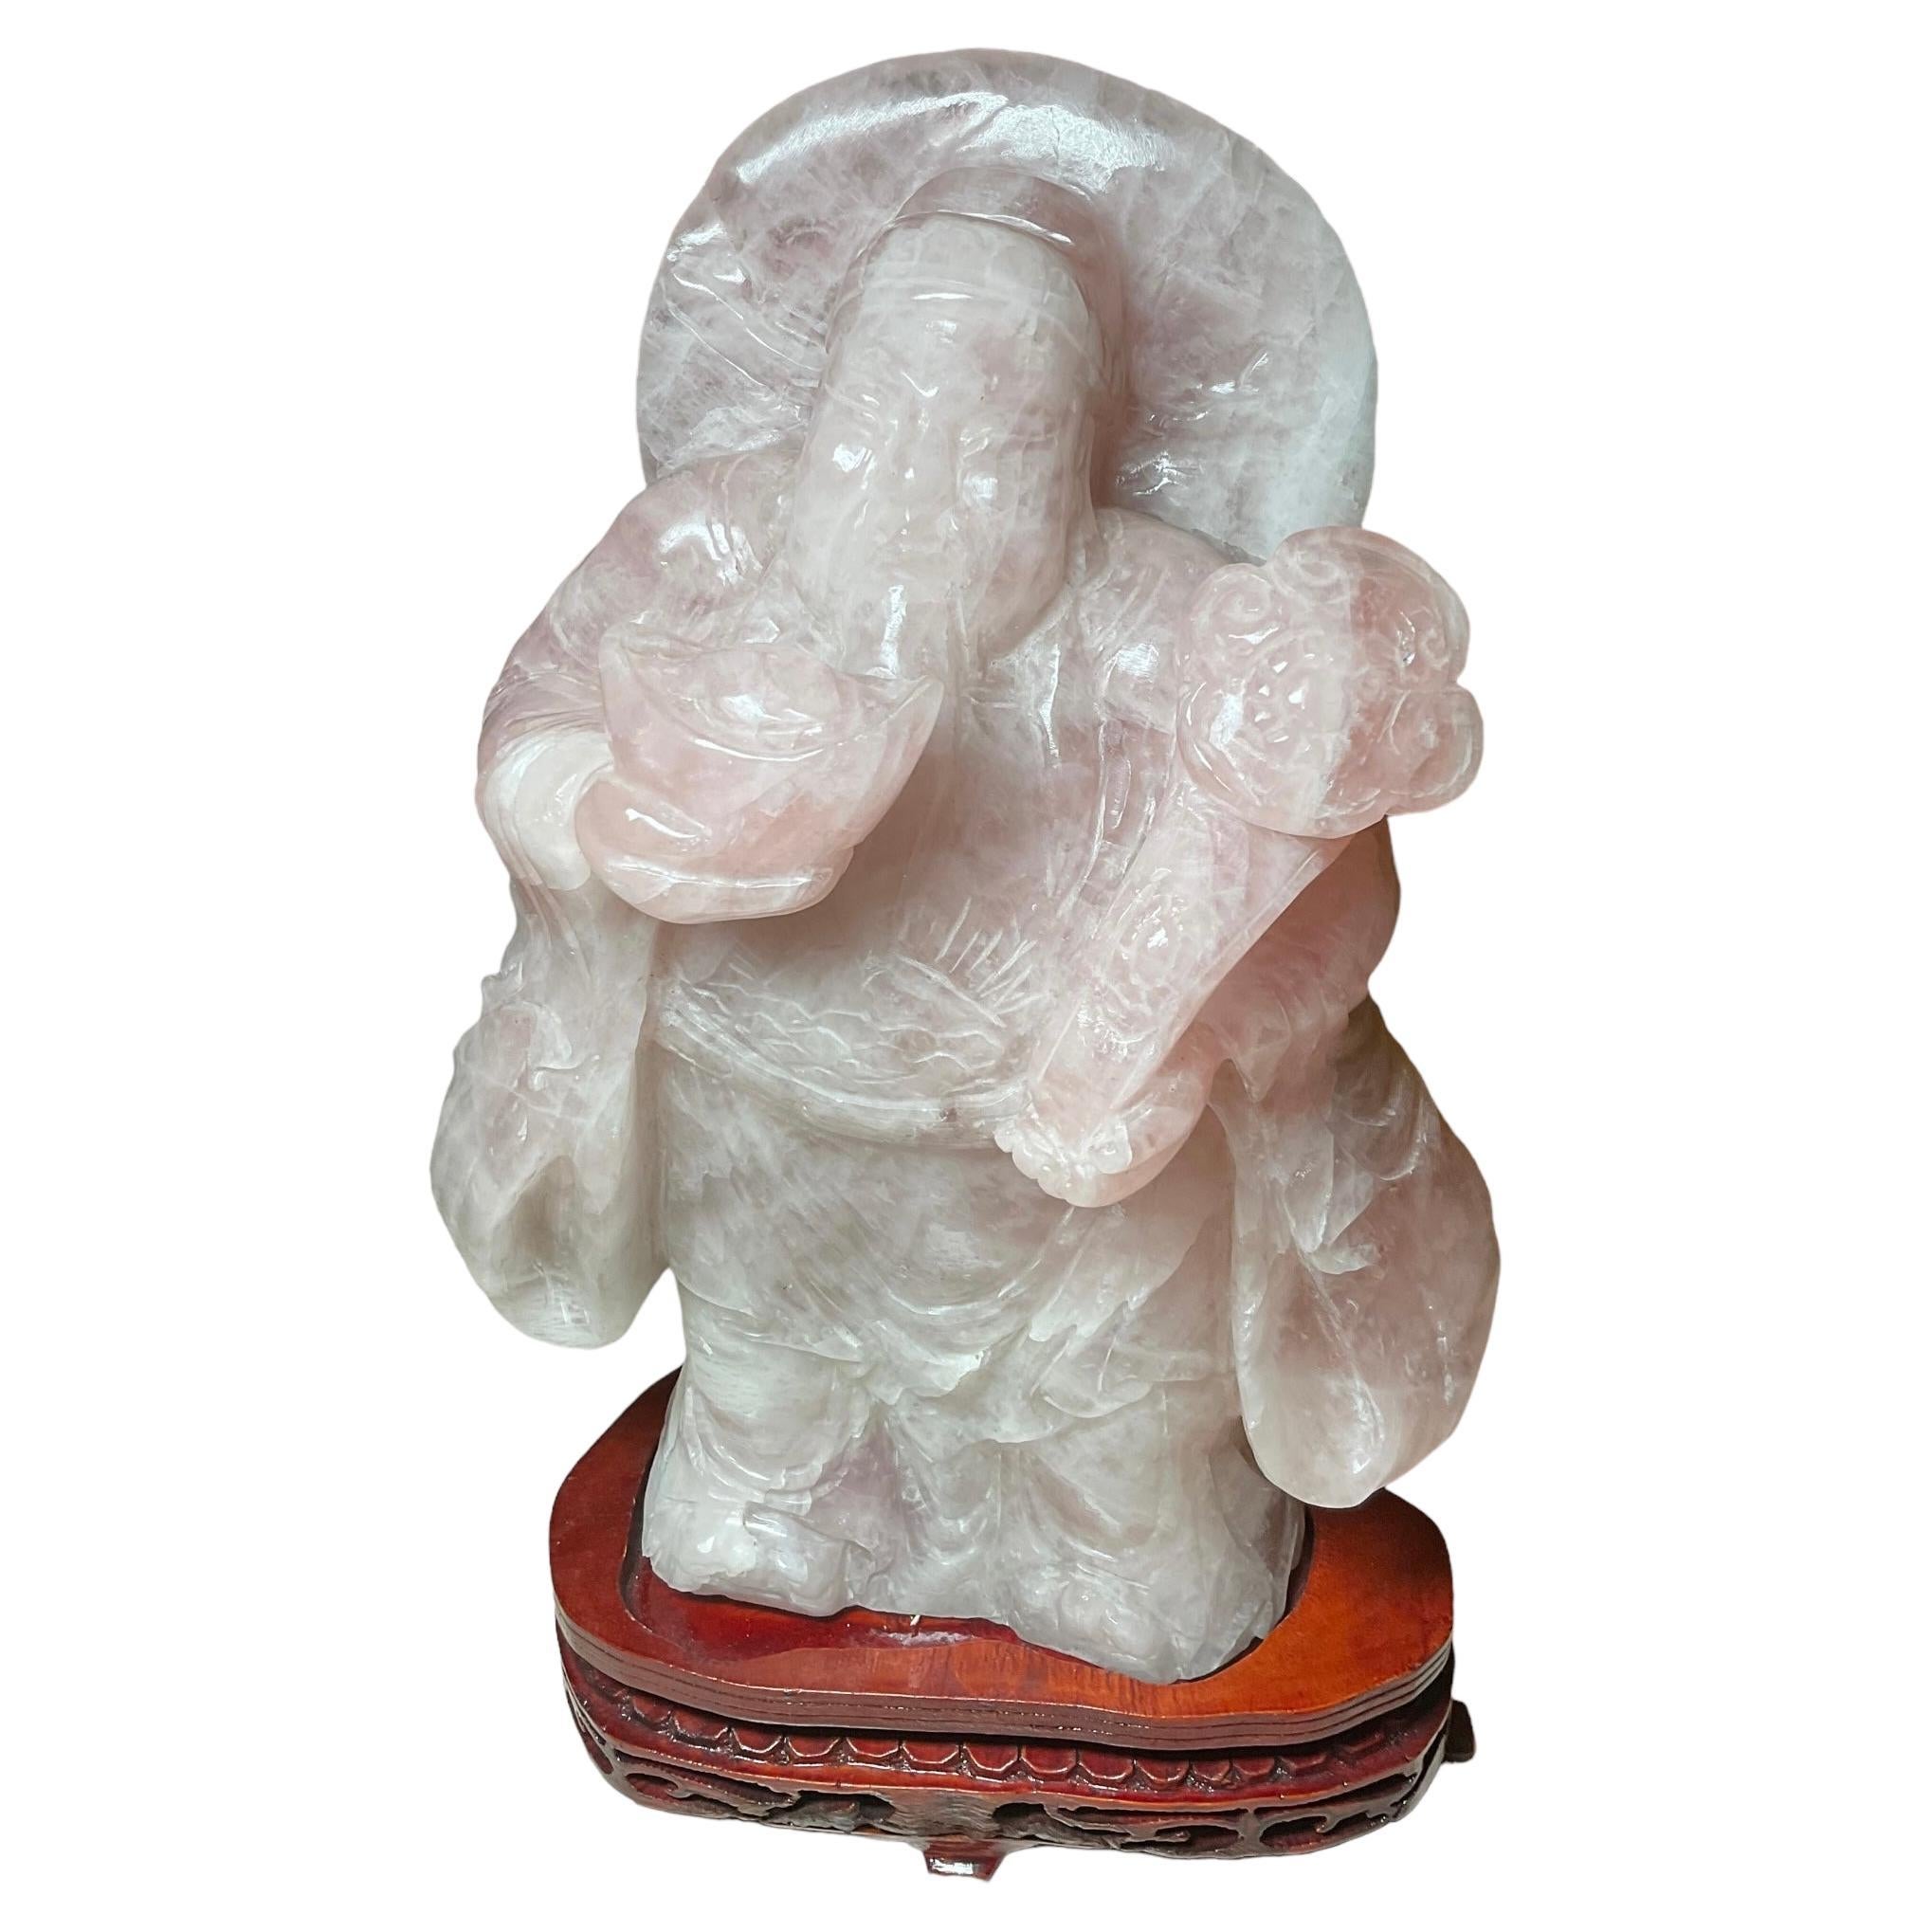 This is a rose quartz heavy sculpture of a Chinese man holding a ruyi scepter. The sculpture is standing over an asymmetrical oval base adorned with some carved scrolls and scalloped motif pattern.